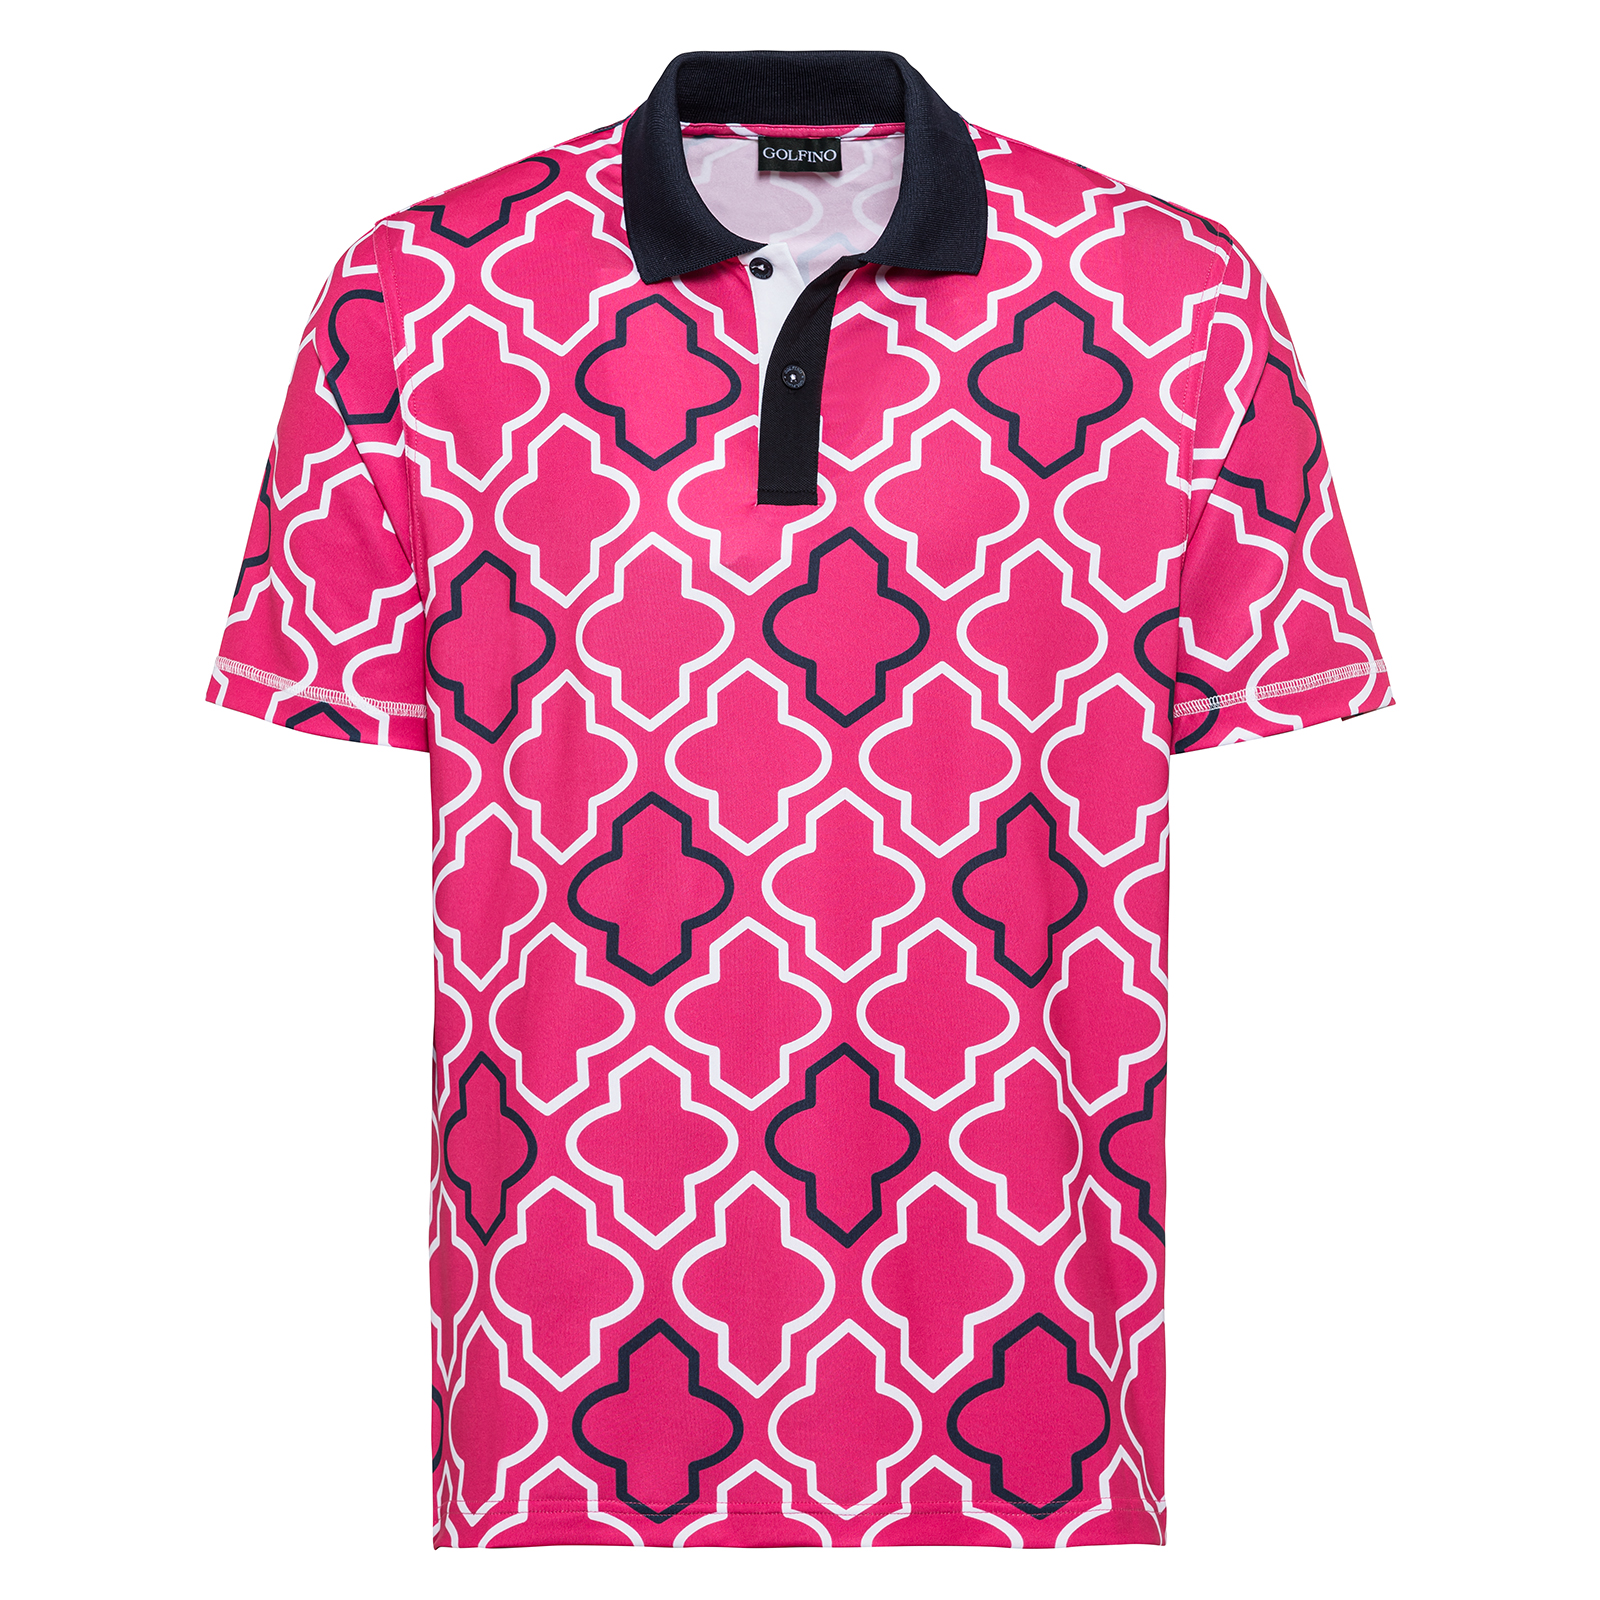 Attractively printed men's golf polo shirt 